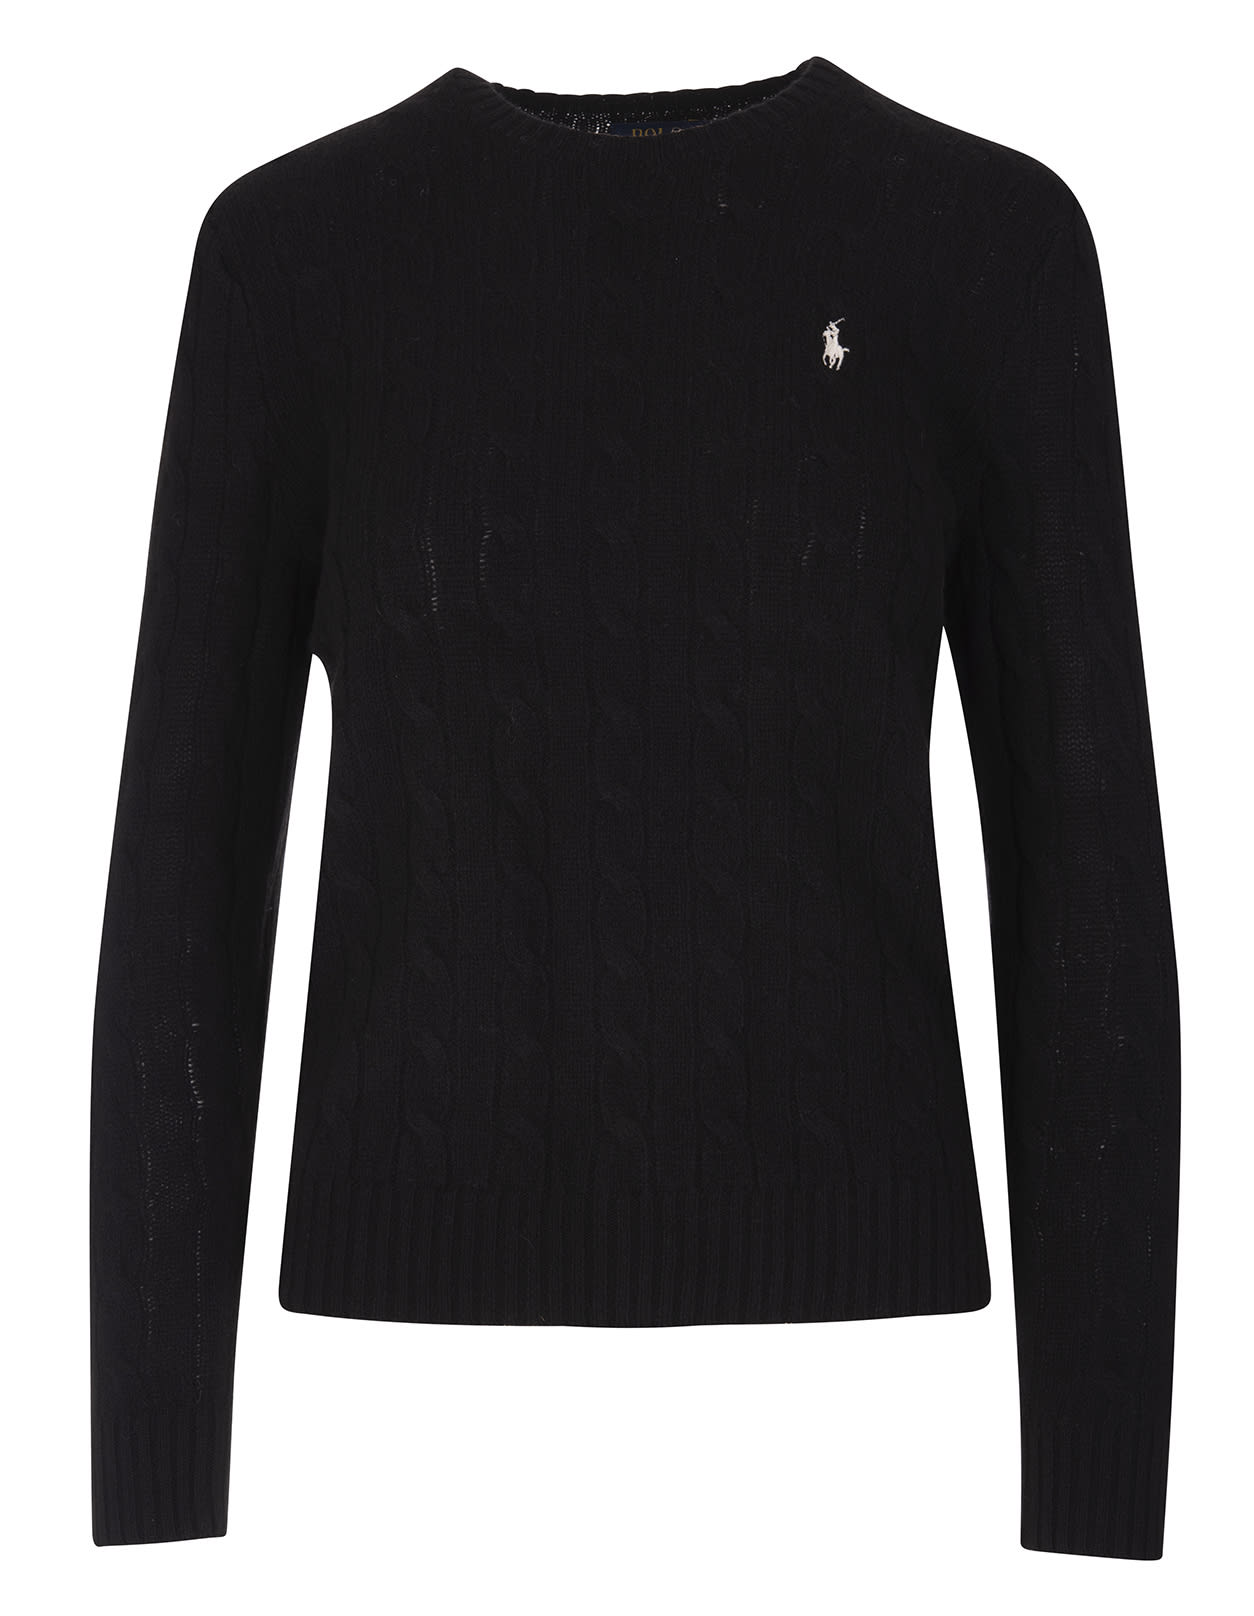 Ralph Lauren Woman Black Crew-neck Sweater In Braided Wool And Cashmere